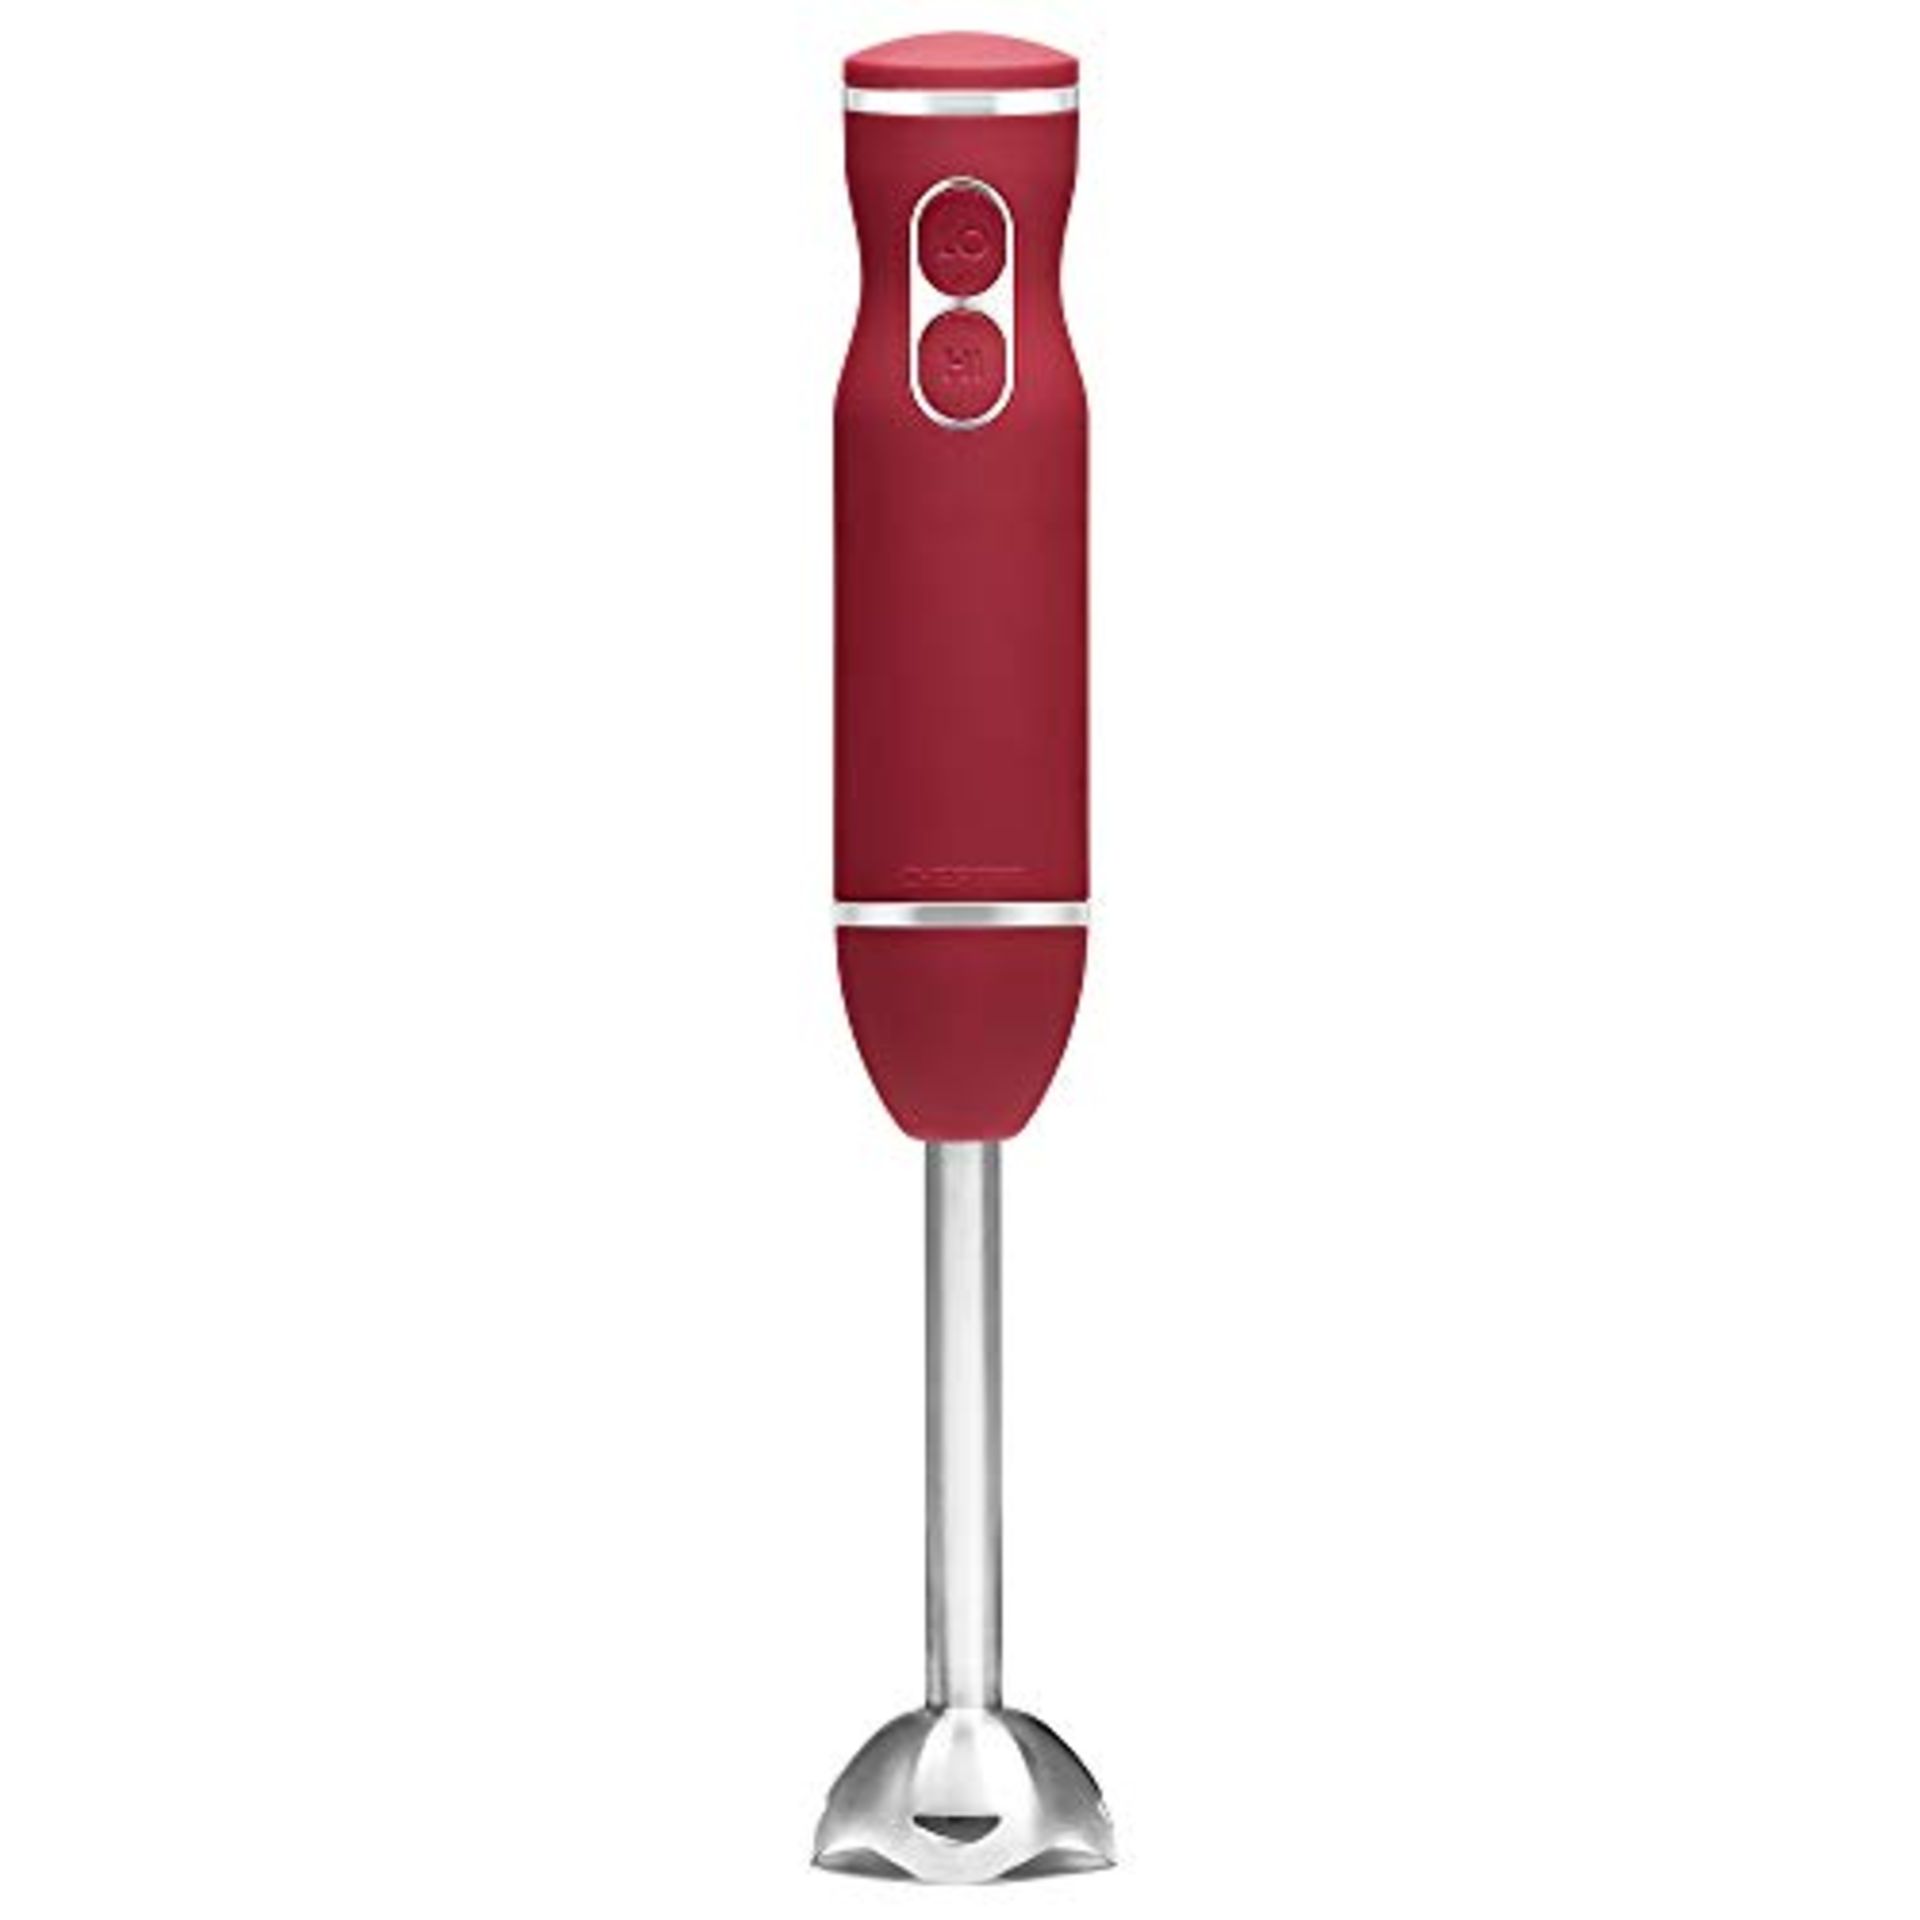 Chefman Immersion Blender, 800W Hand Blender with Stainless Steel Blades, Powerful Ele